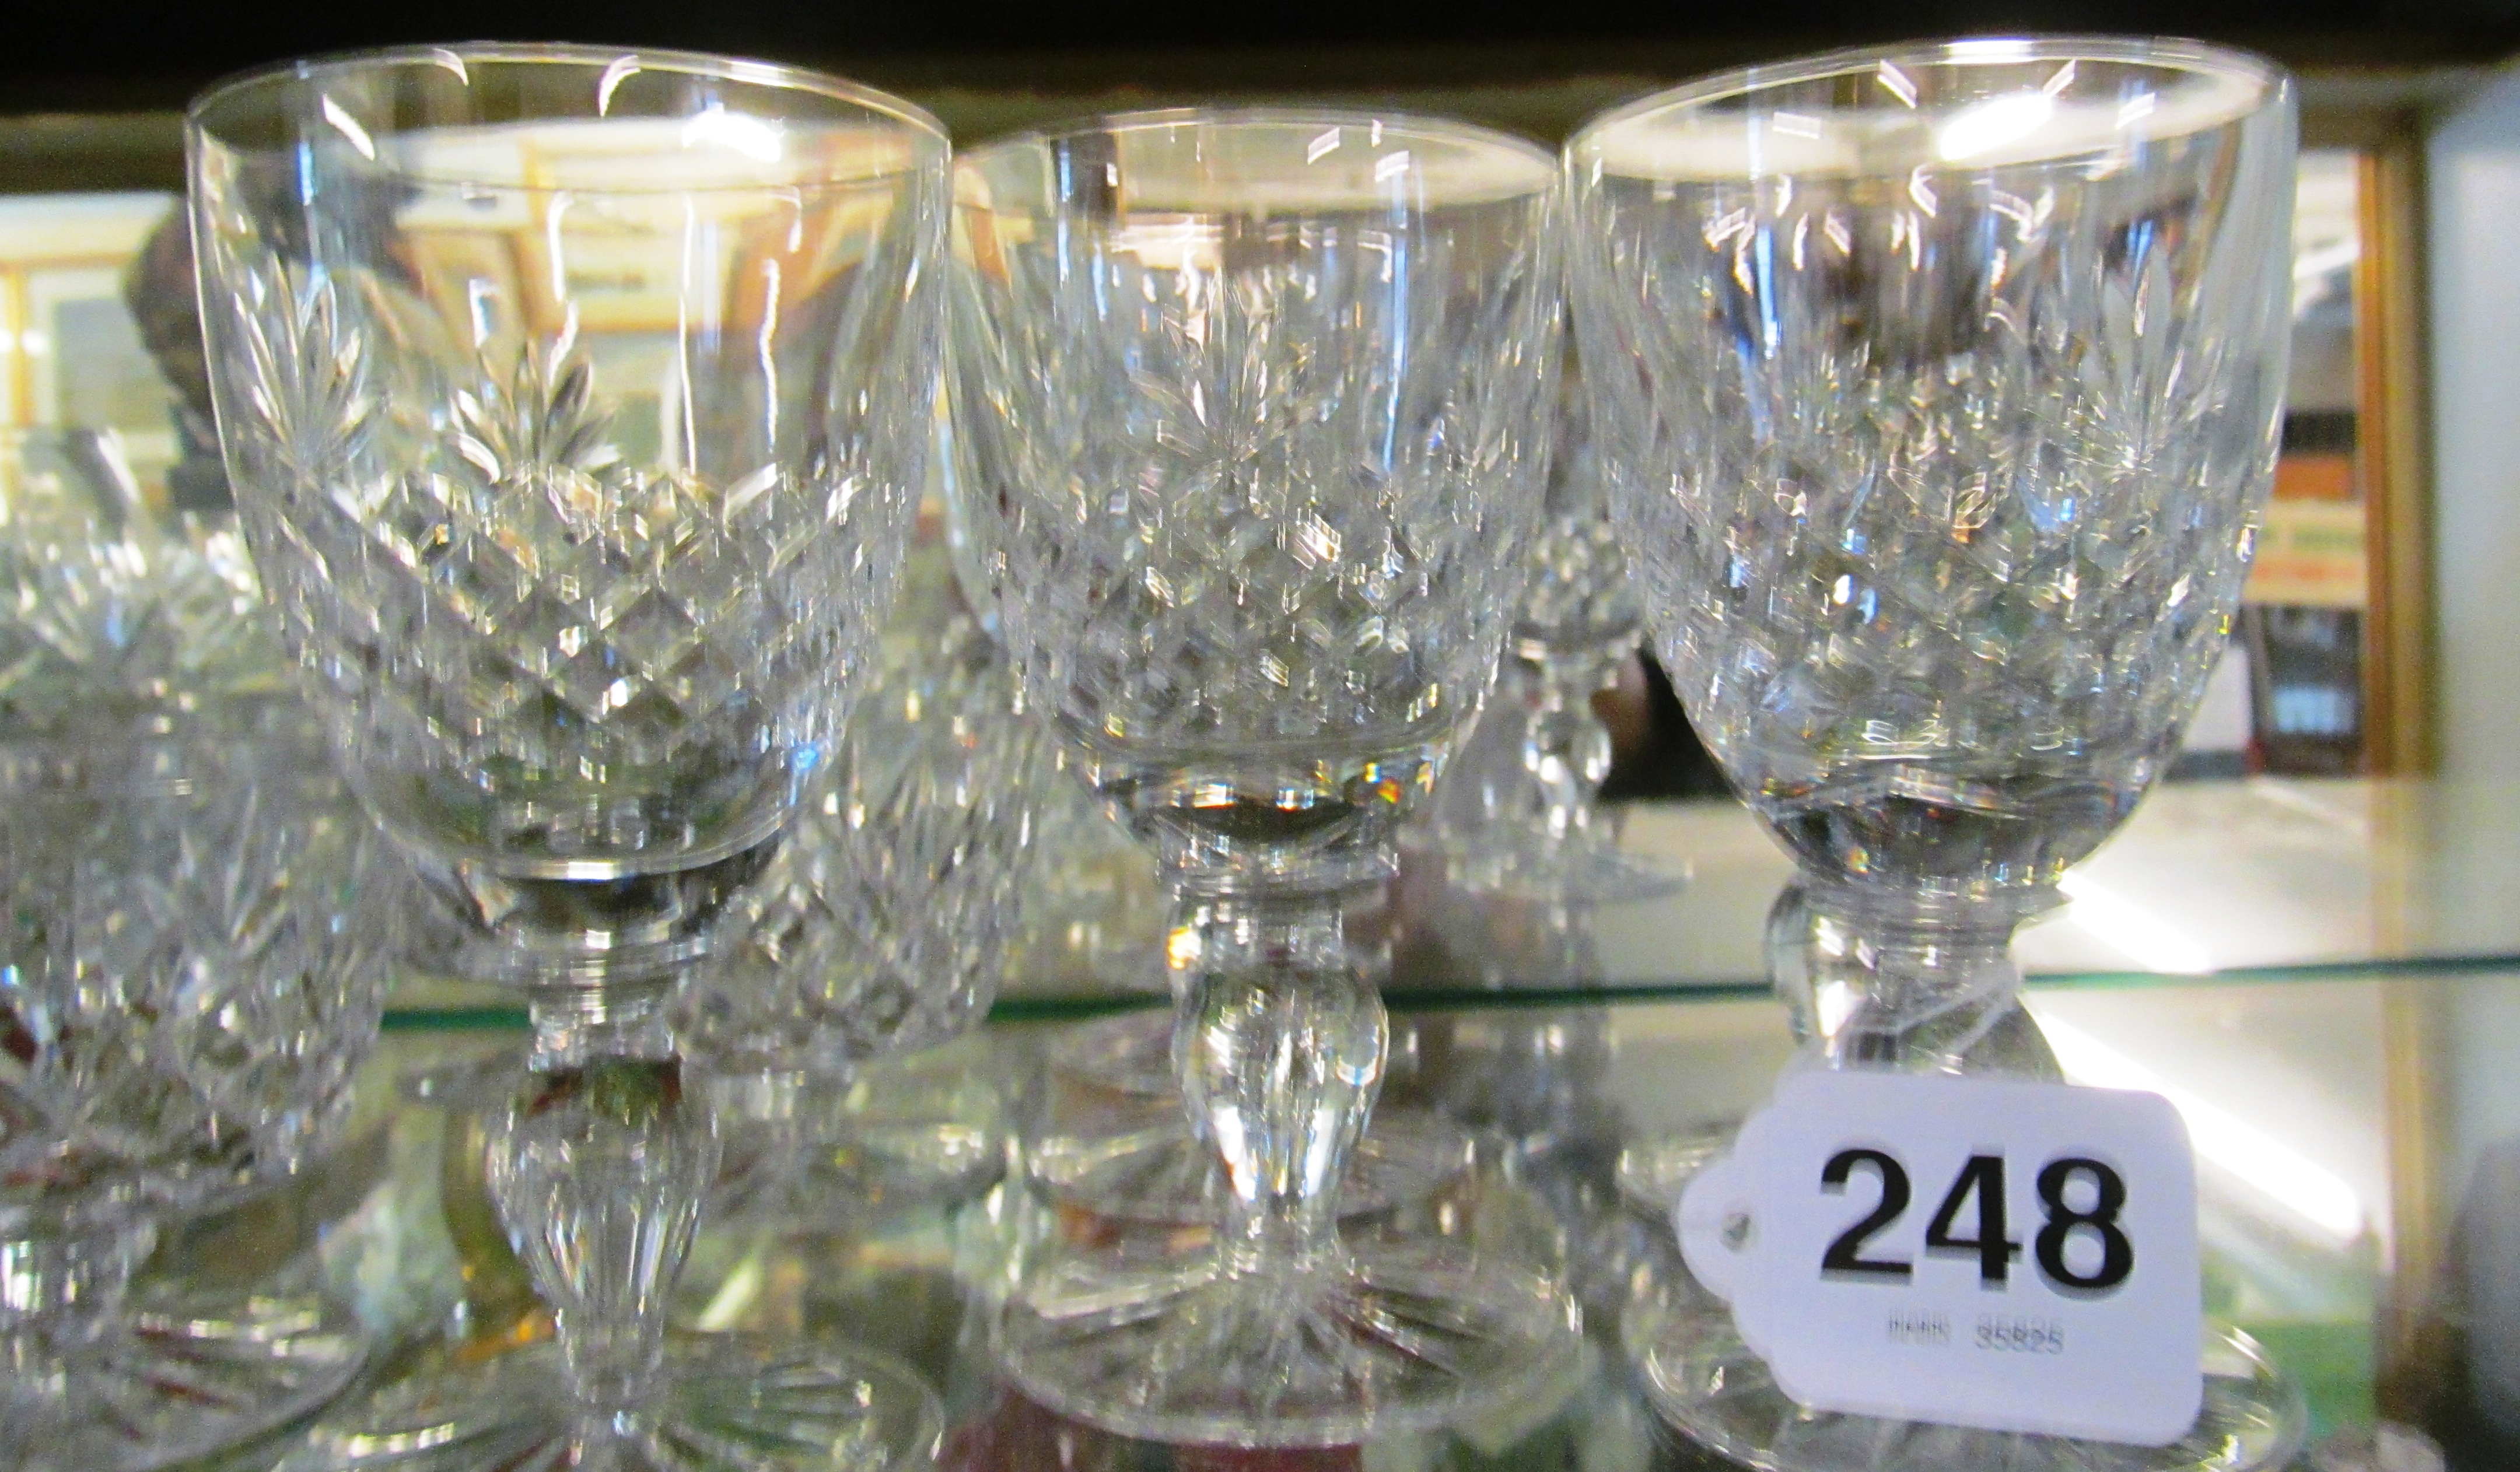 Six Royal Doulton crystal tumblers, six cut glass wine glasses and other drinking glasses